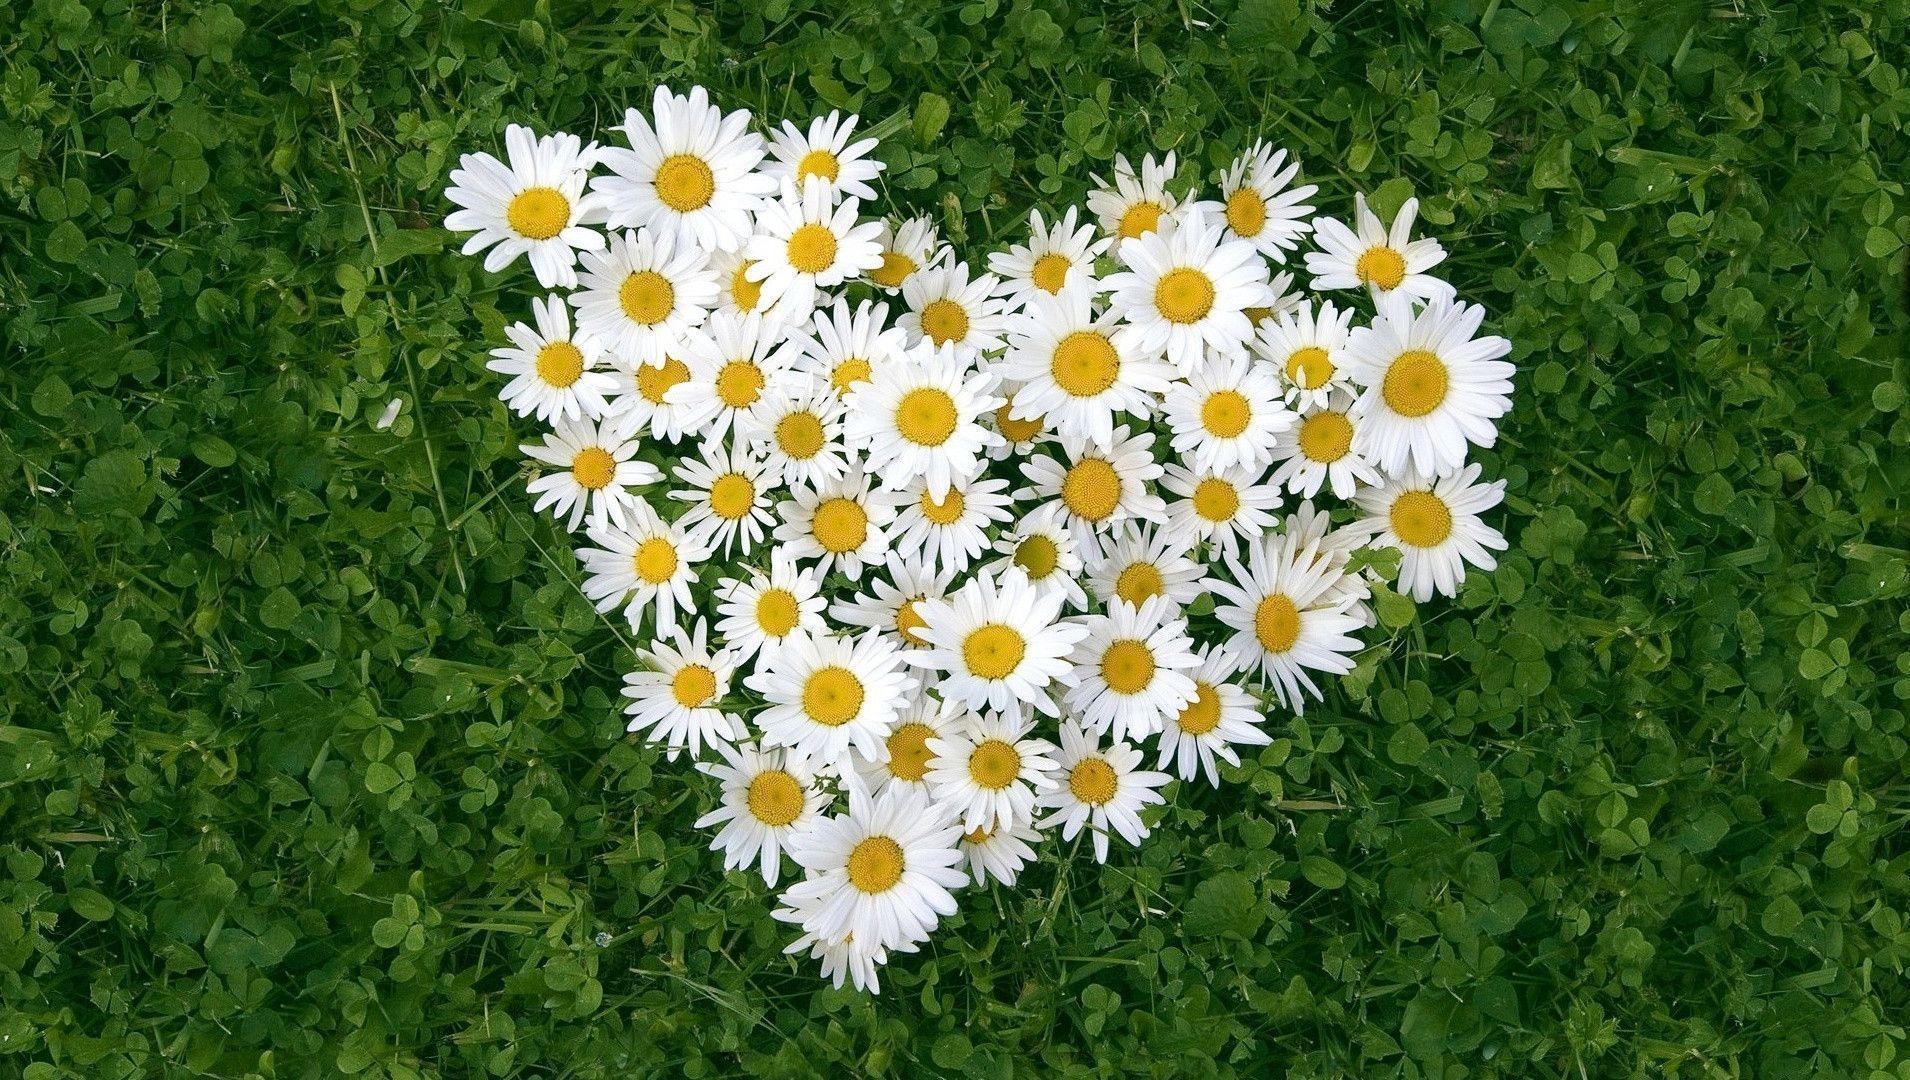 Daisy Flowers Love Heart on Green Grass Free and Wallpaper